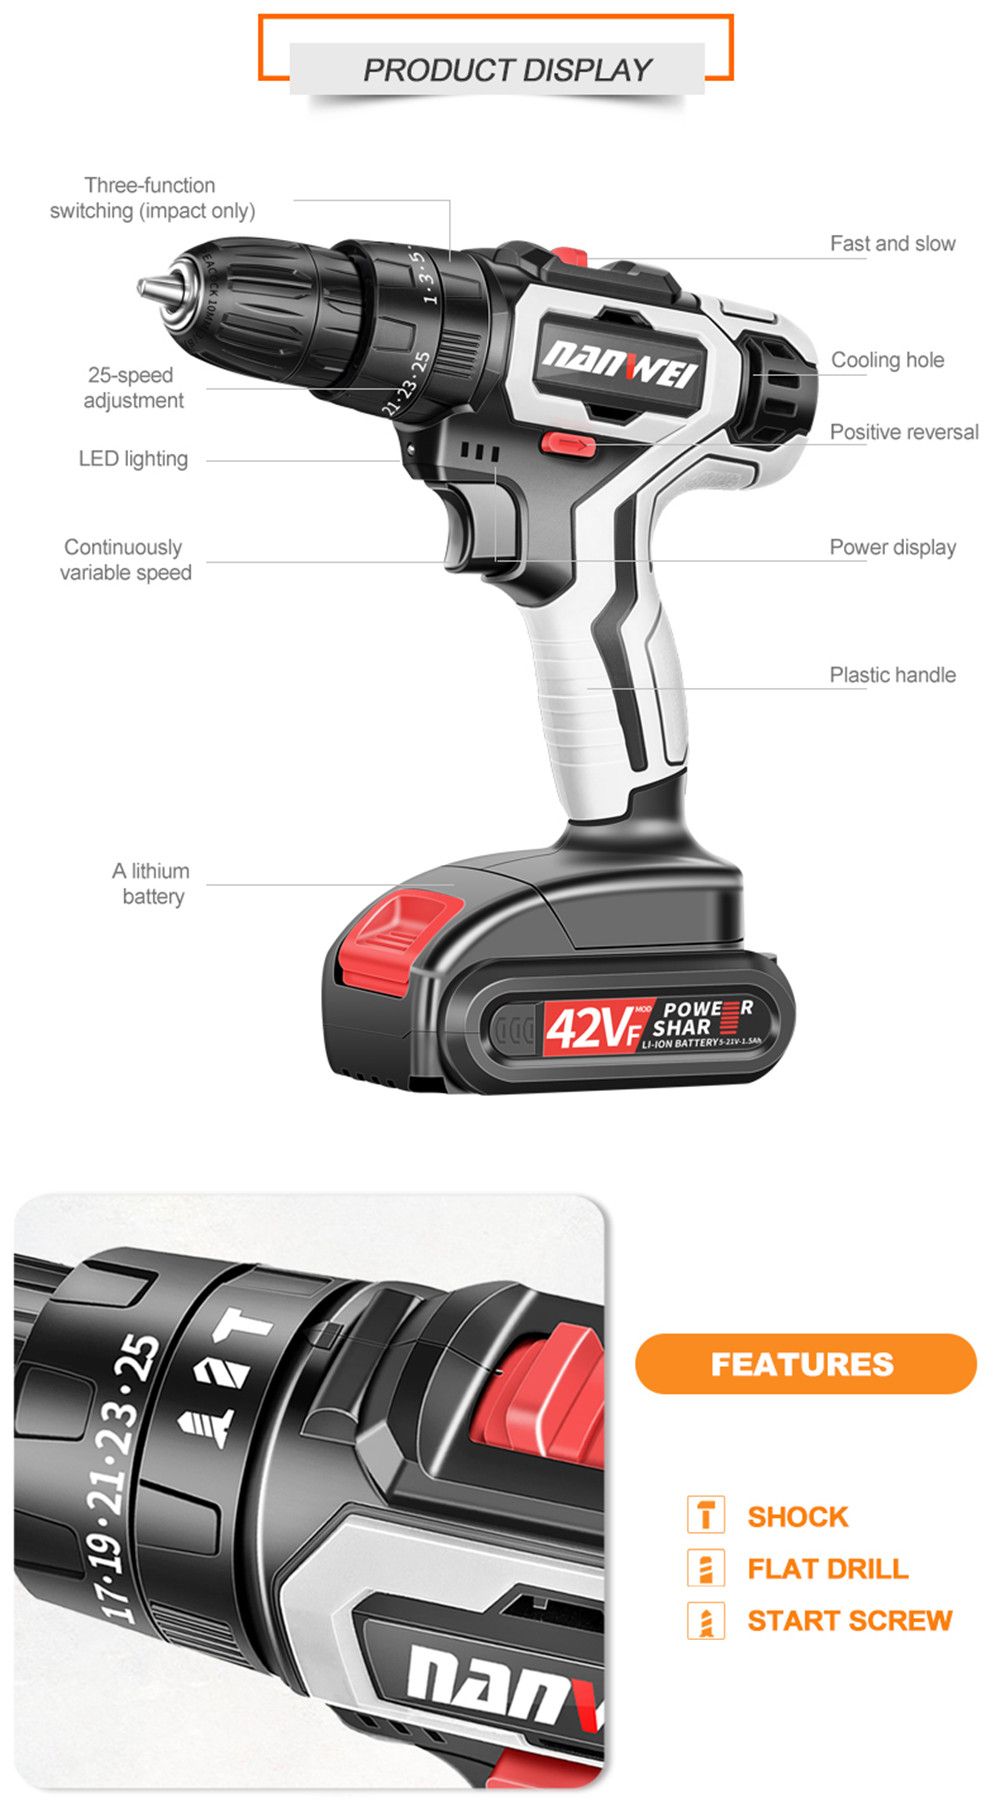 Nanwei-18V-Brushed-Impact-Drill-27NM-Li-ion-Rechargeable-Electric-Flat-Drill-Screw-Driver-2-Speeds-2-1695925